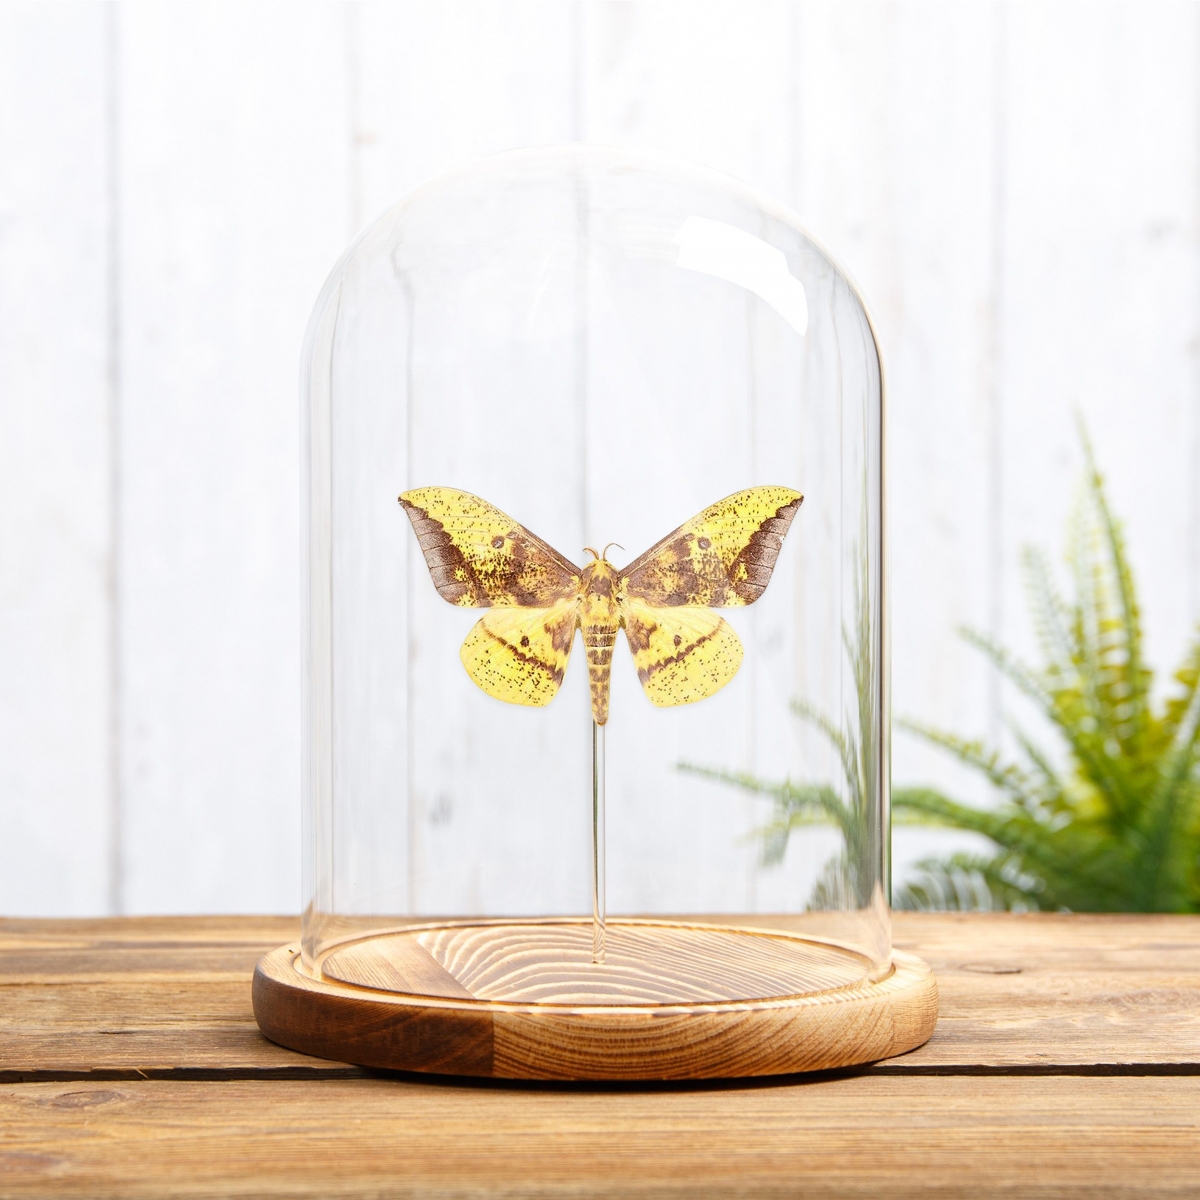 Imperial Moth in Glass Dome with Wooden Base (Eacles imperialis)